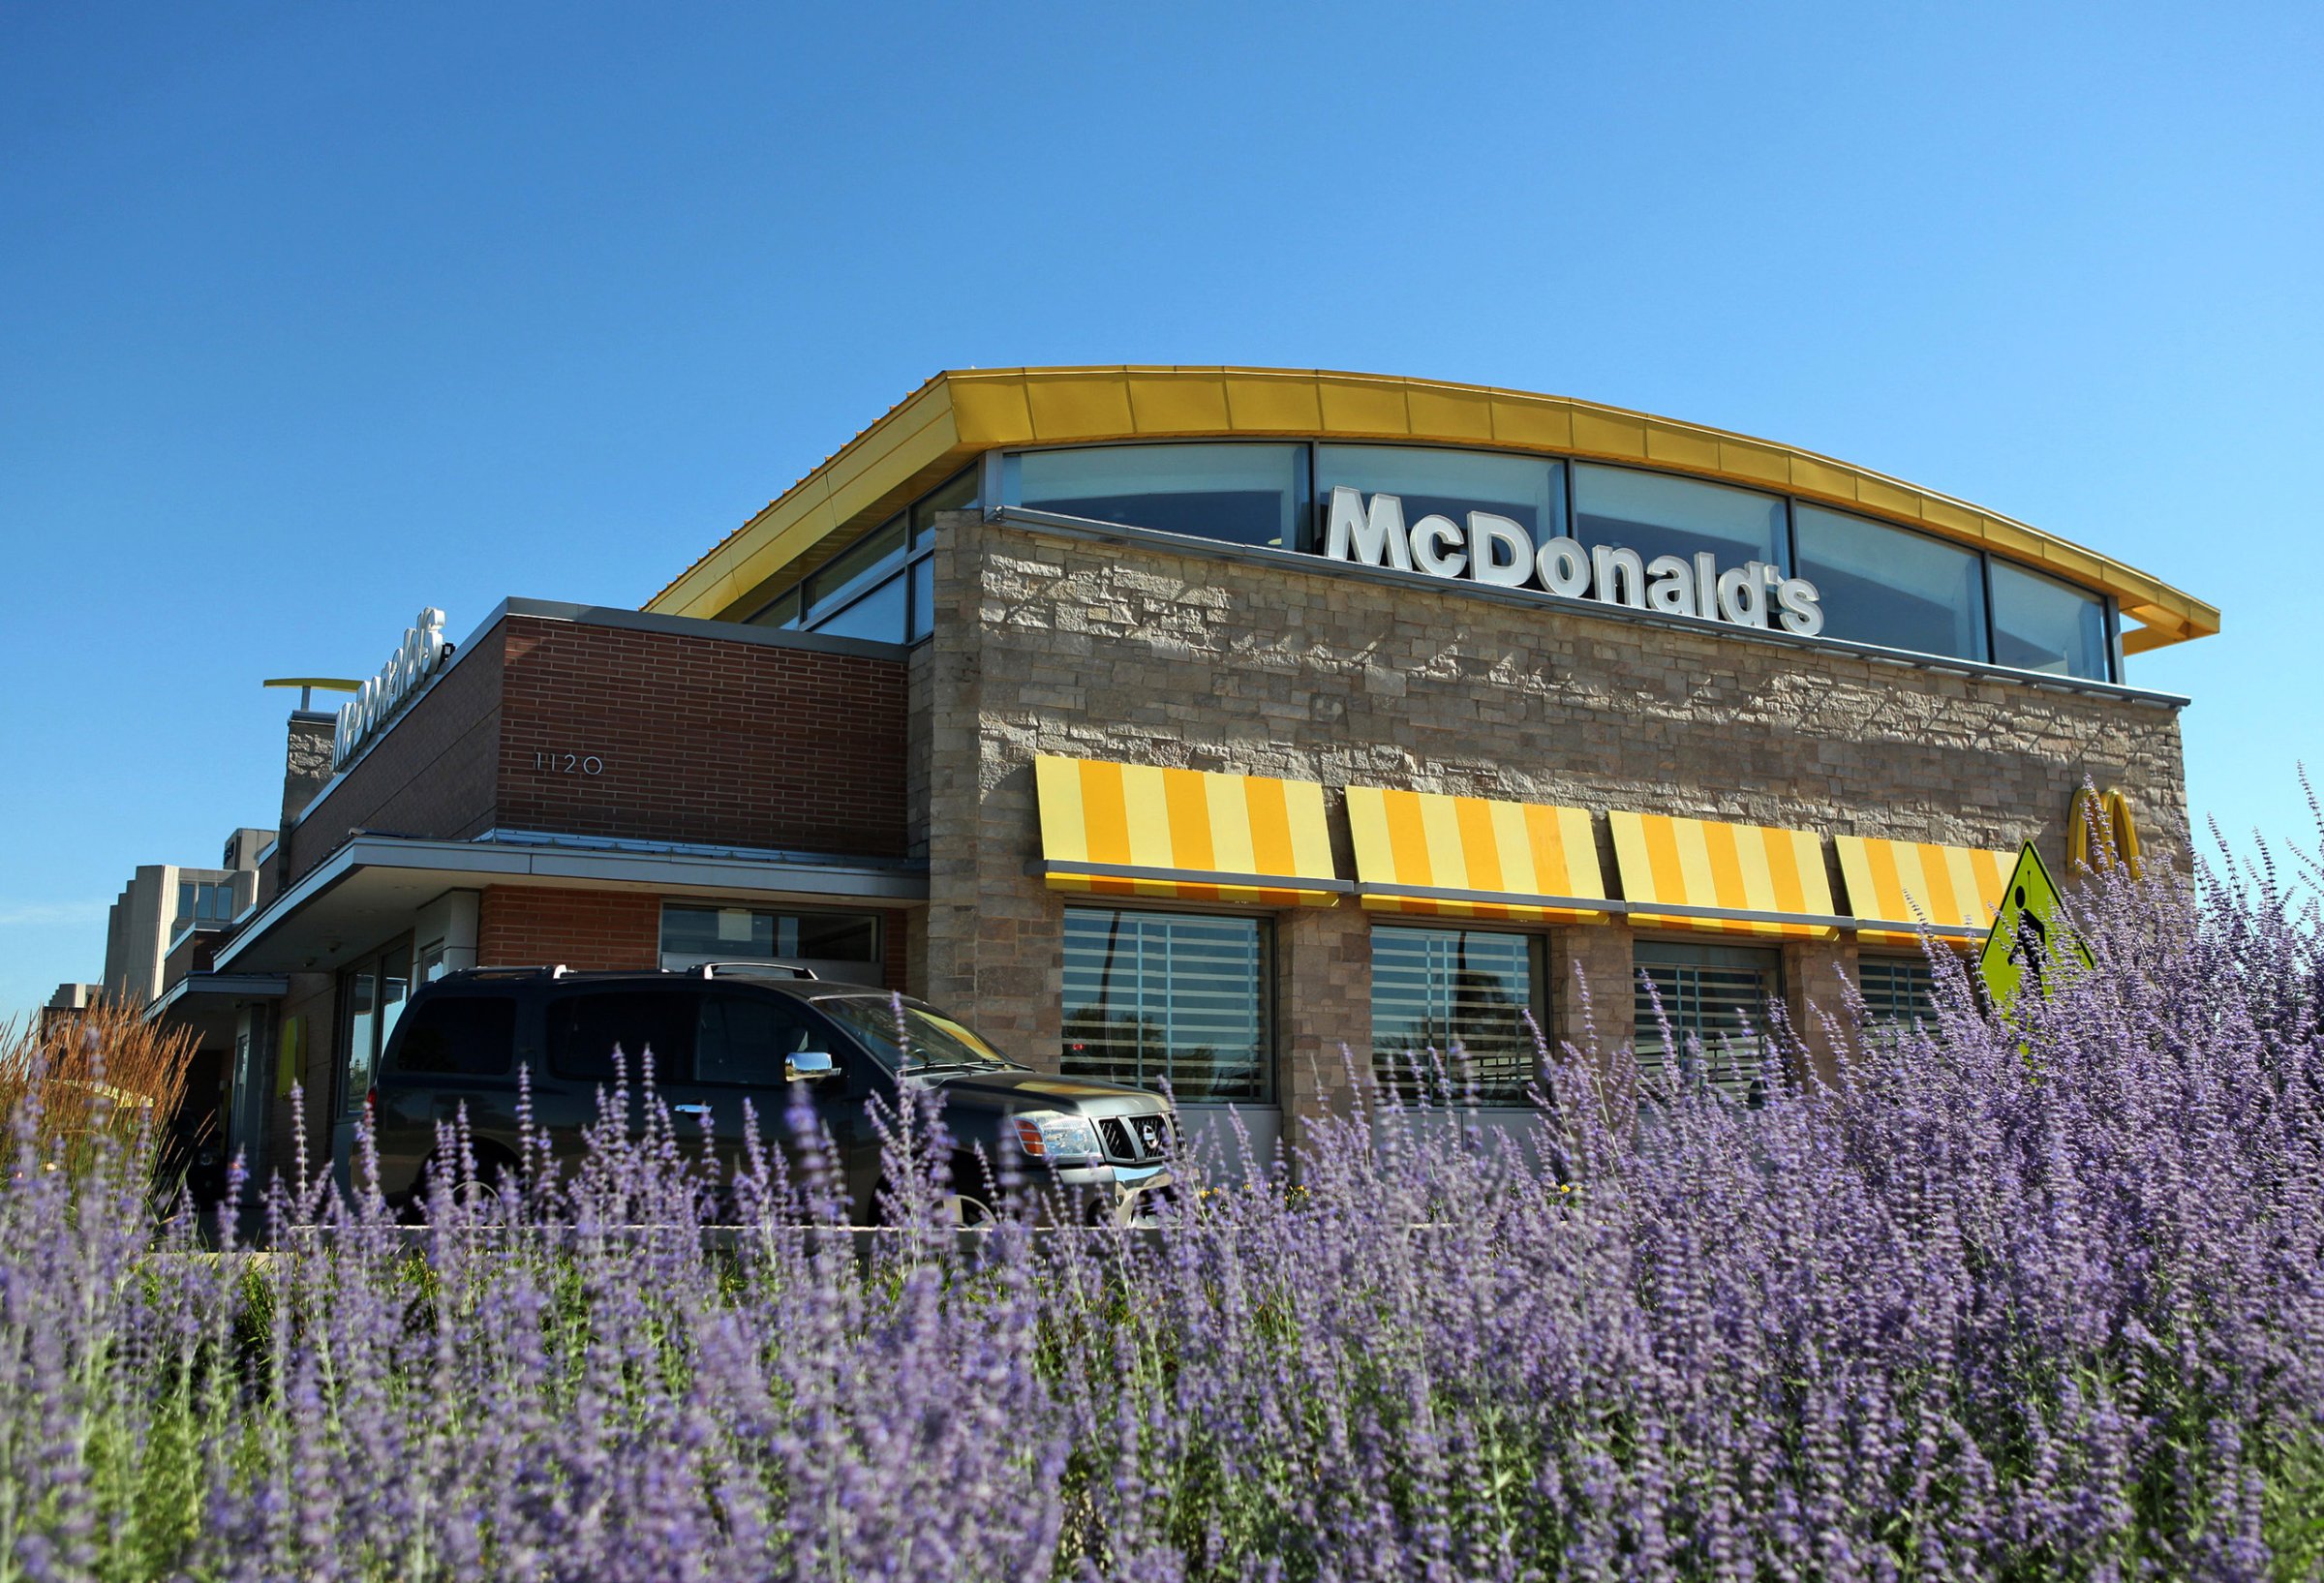 A car passes in front a McDonald's Corp. restaurant in Oak Brook, Illinois, U.S., on July 12, 2013.